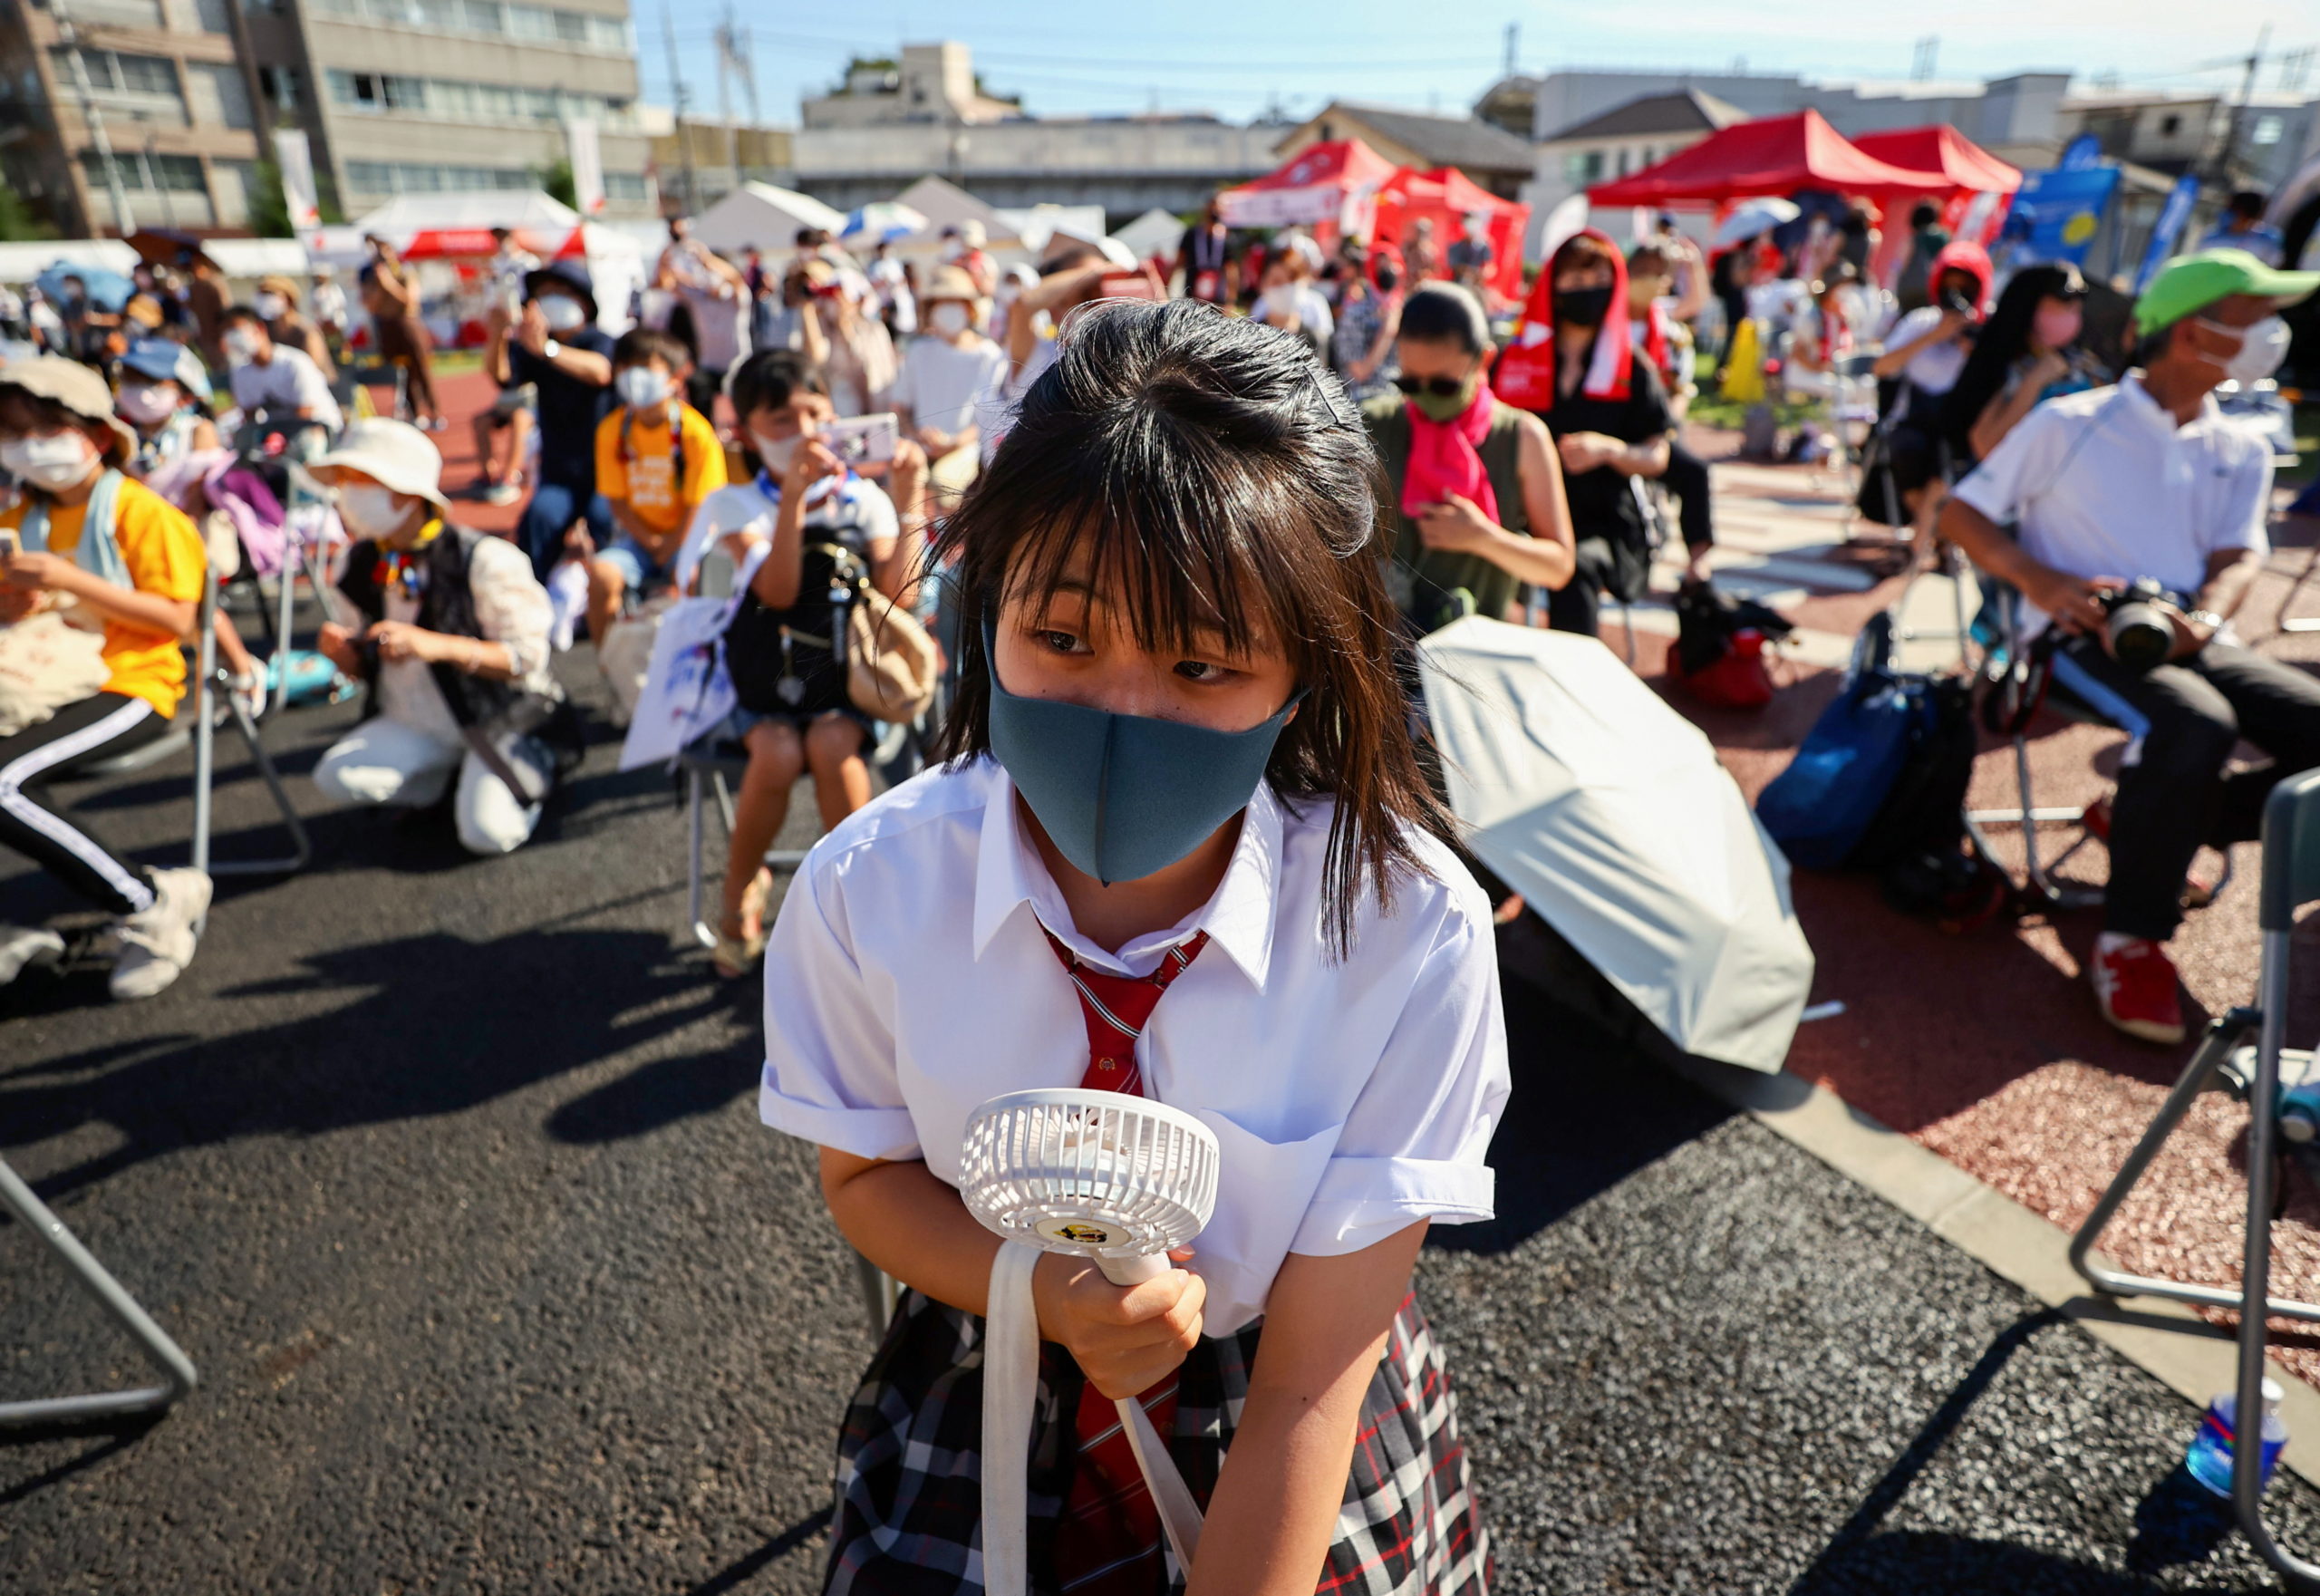 A family member of a torch relay runner wearing a protective mask uses a portable electric fan to cool down as she attends a torch kiss event during Tokyo 2020 Olympic torch relay celebration at Shinagawa Central Park in Tokyo, Japan, 